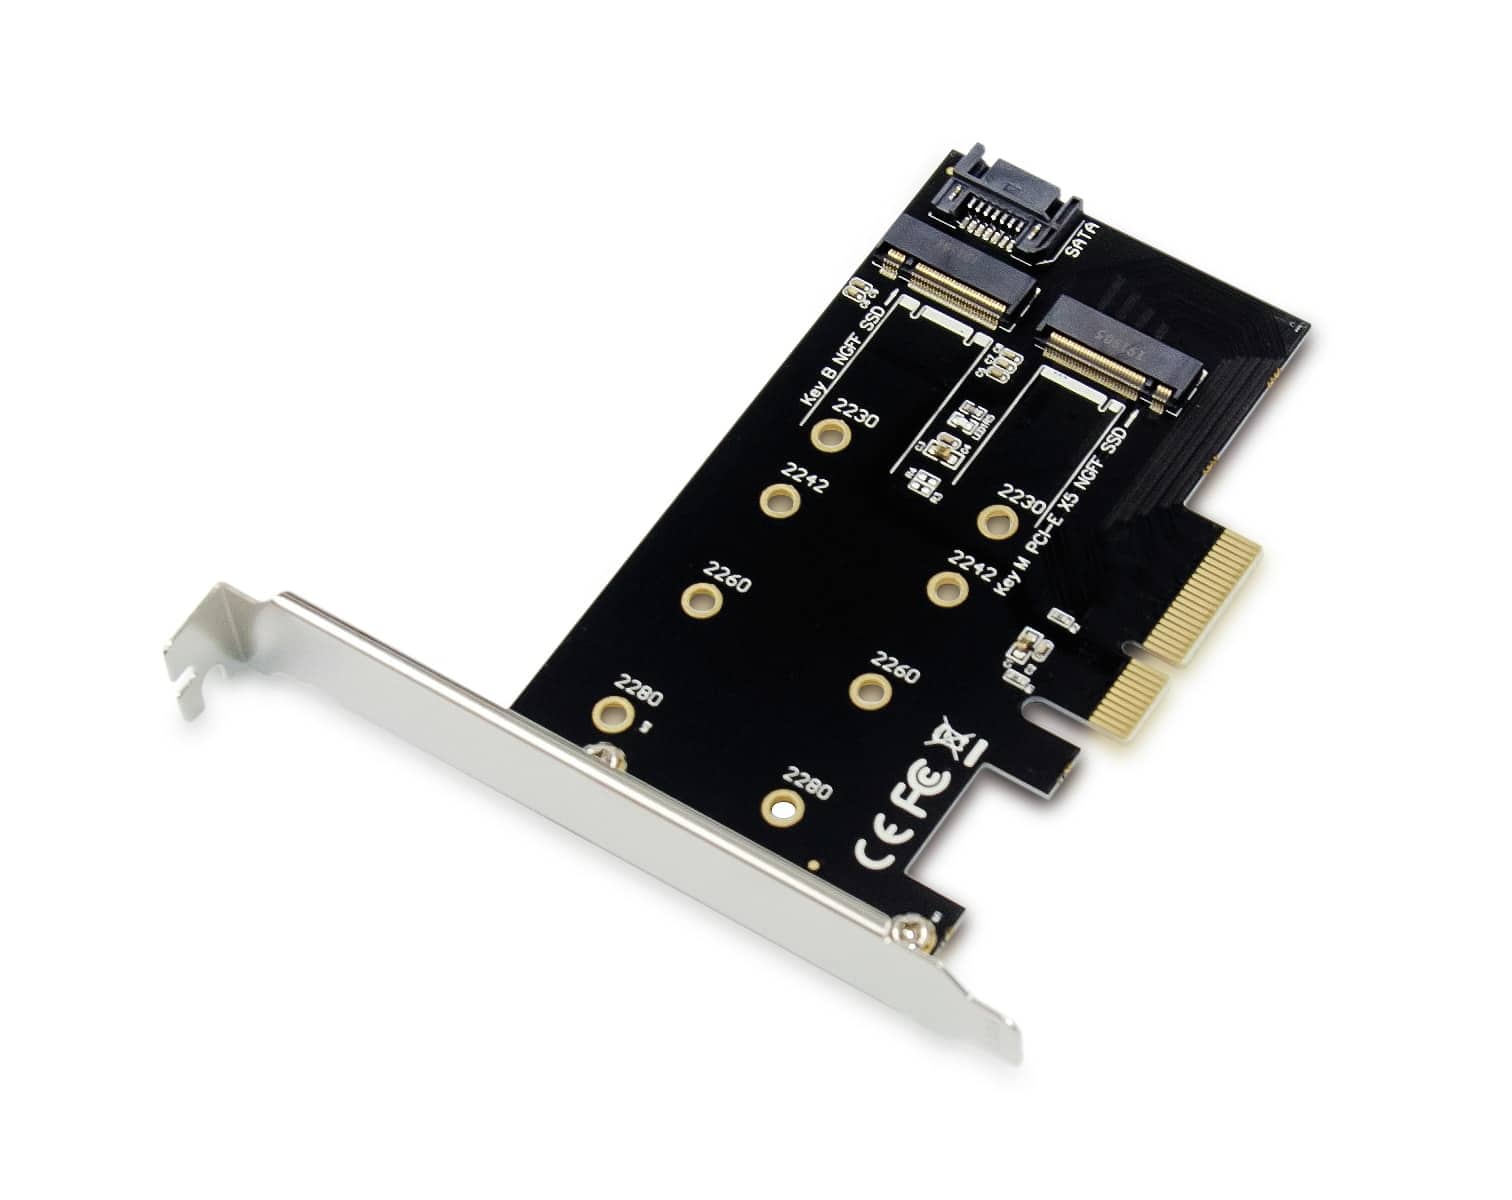 CONCEPTRONIC PCI Express Card 2-in-1 M.2 SSD PCIe Adapter